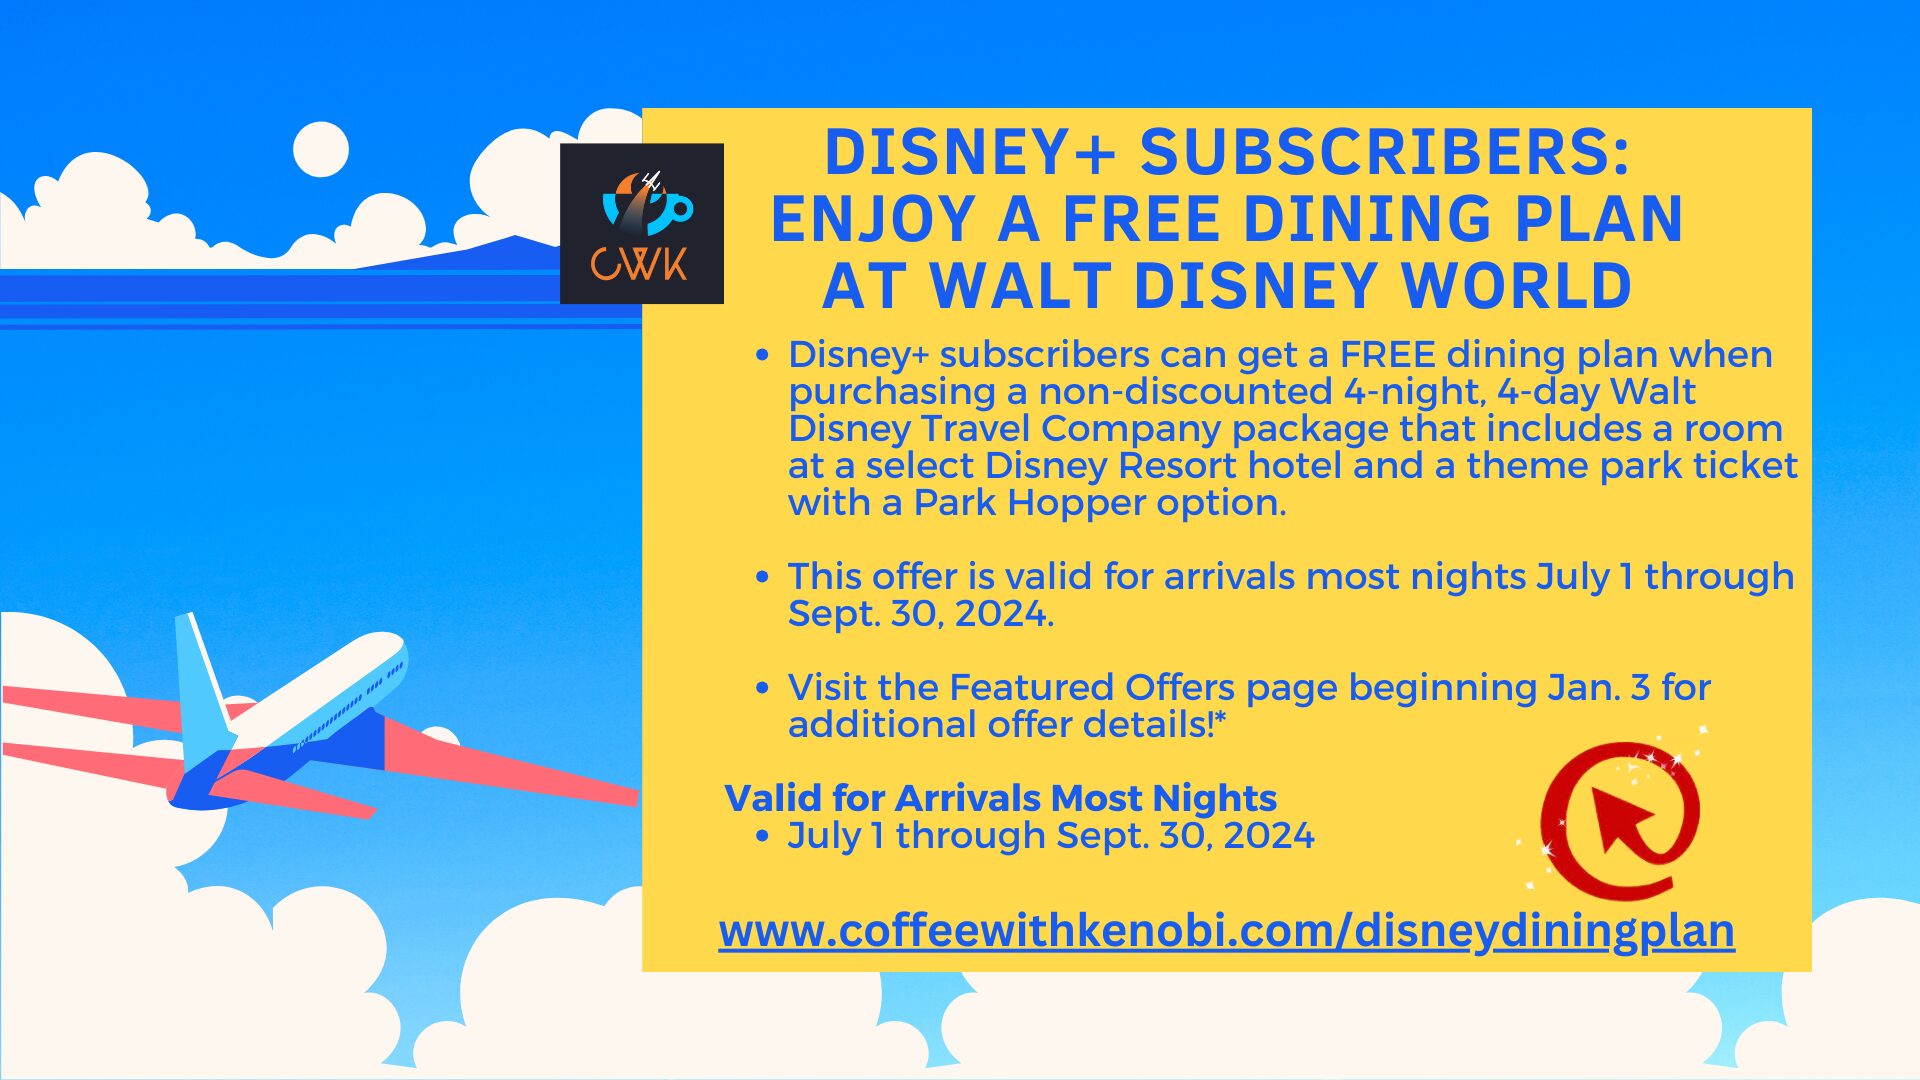 Disney+ Subscribers Receive a Free Dining Plan at WDW!